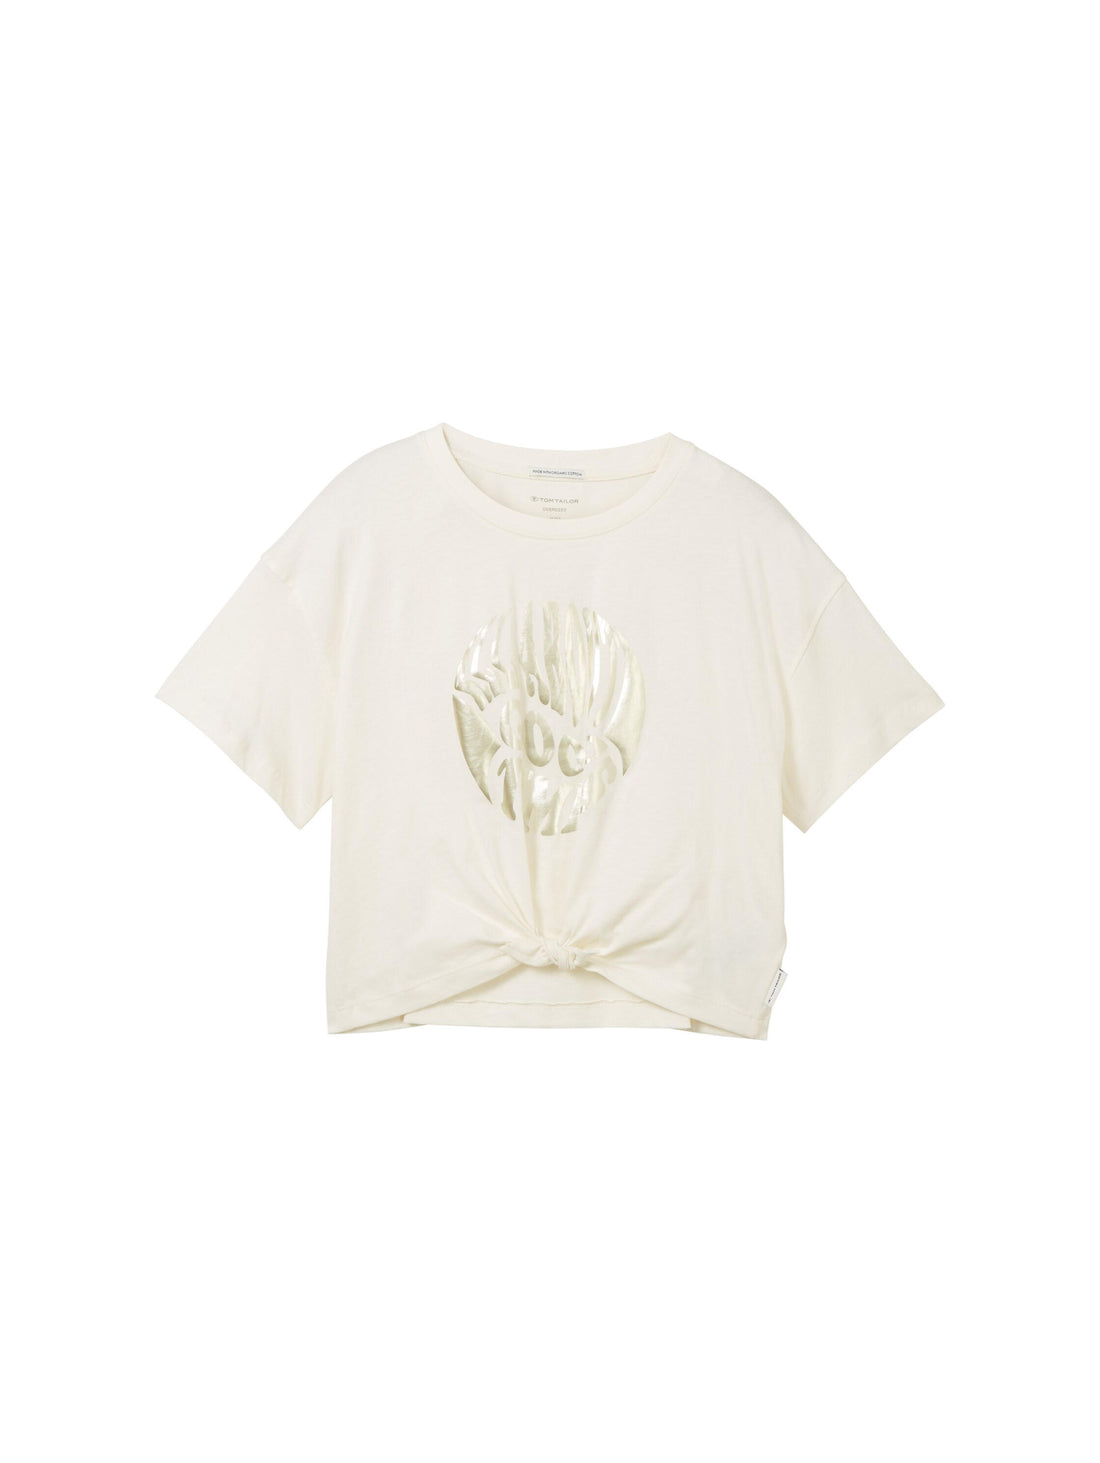 Cropped Knotted T-Shirt_1040394_12906_01